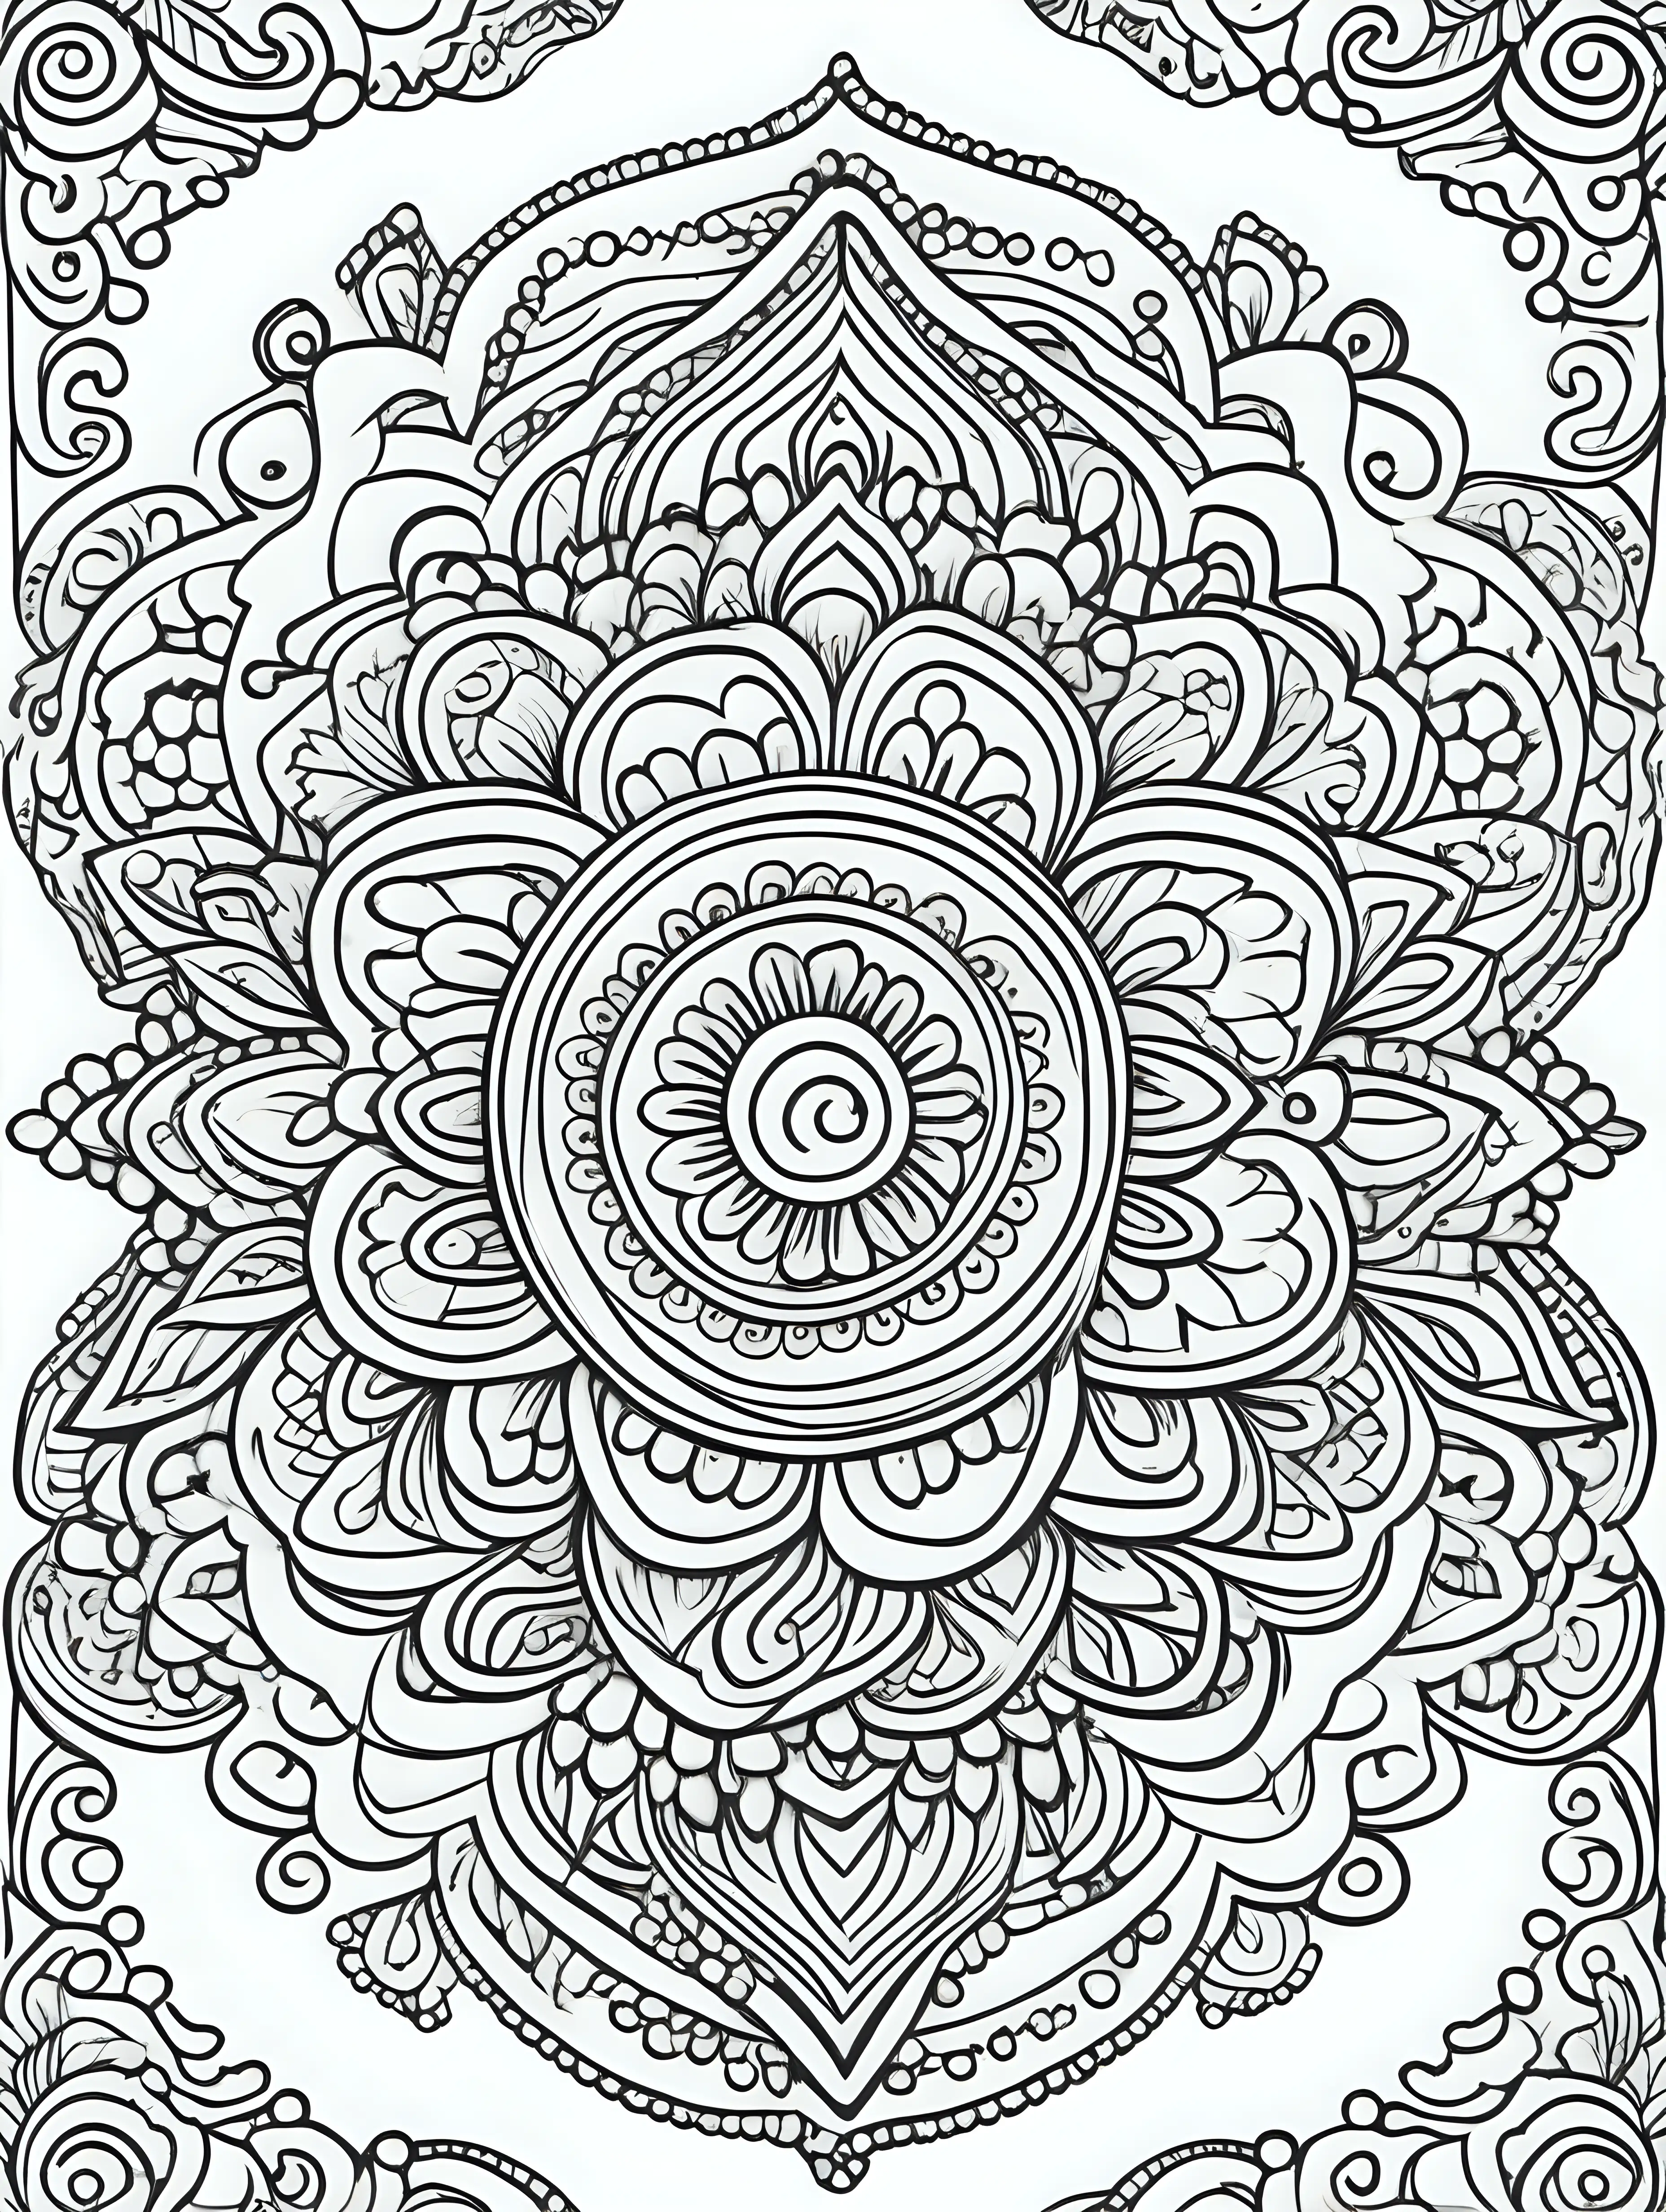 thick lines, henna patterns, coloring page, no colors